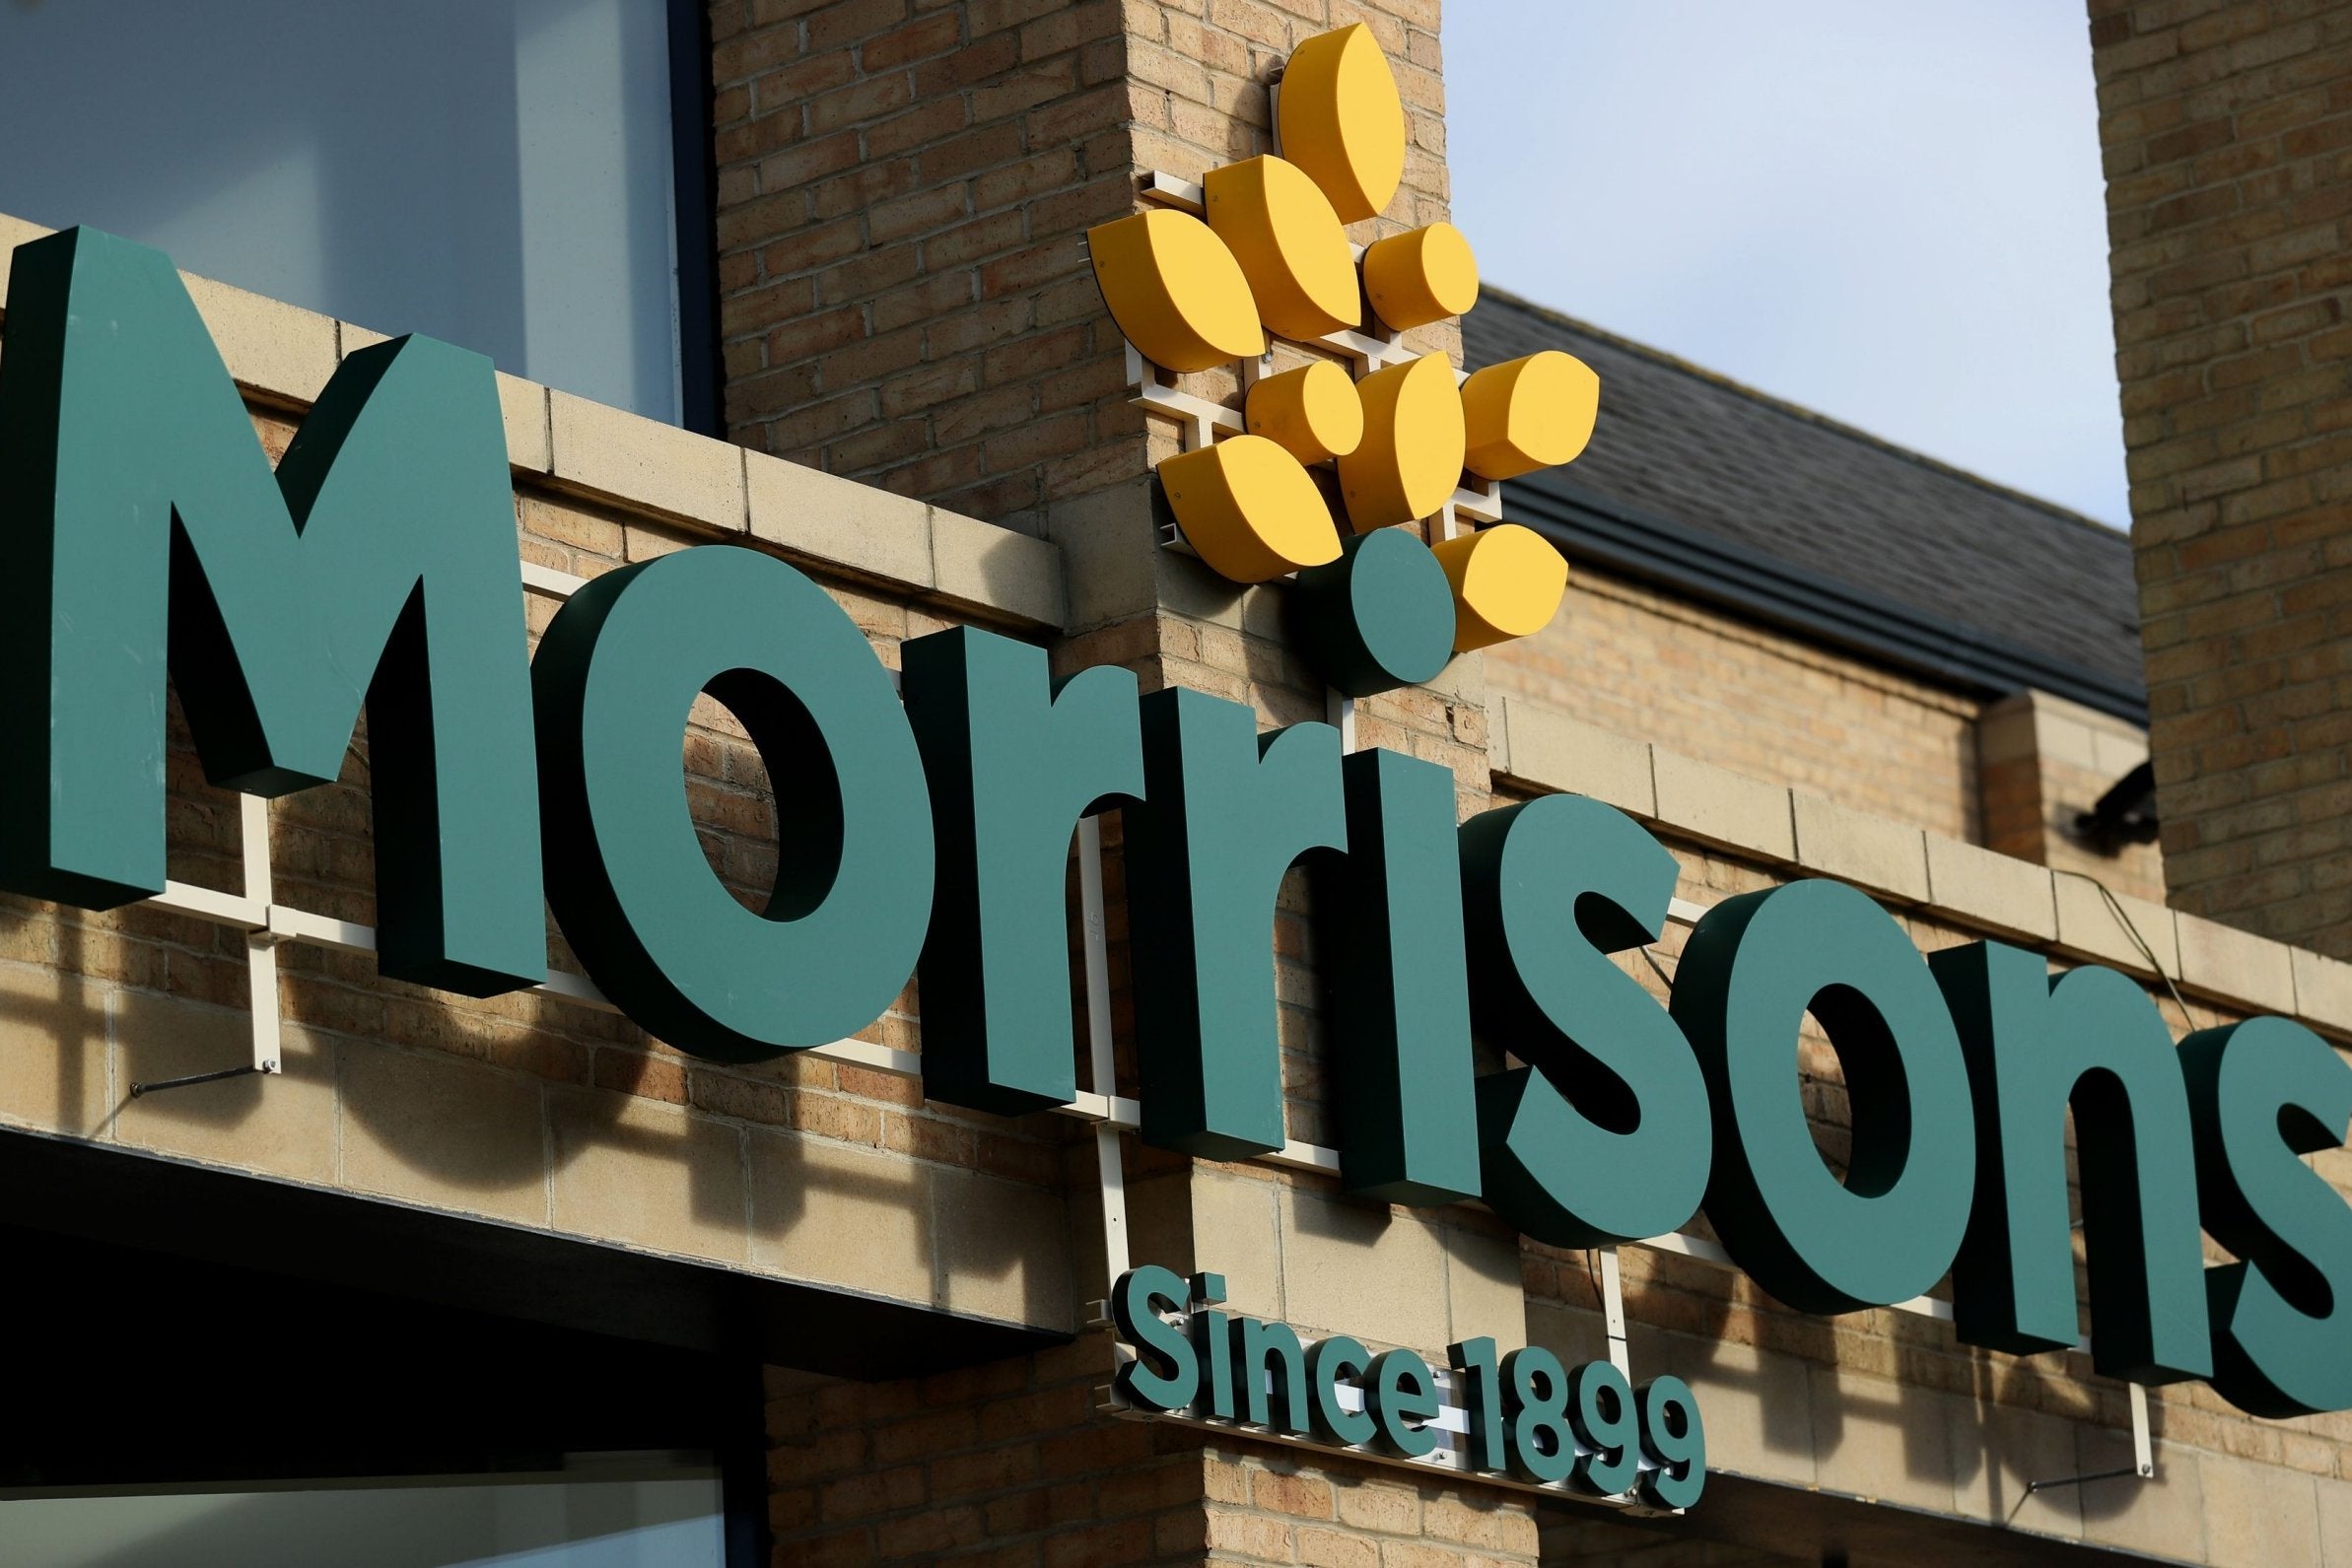 Morrisons: Supermarkets latest figures have disappointed the markets